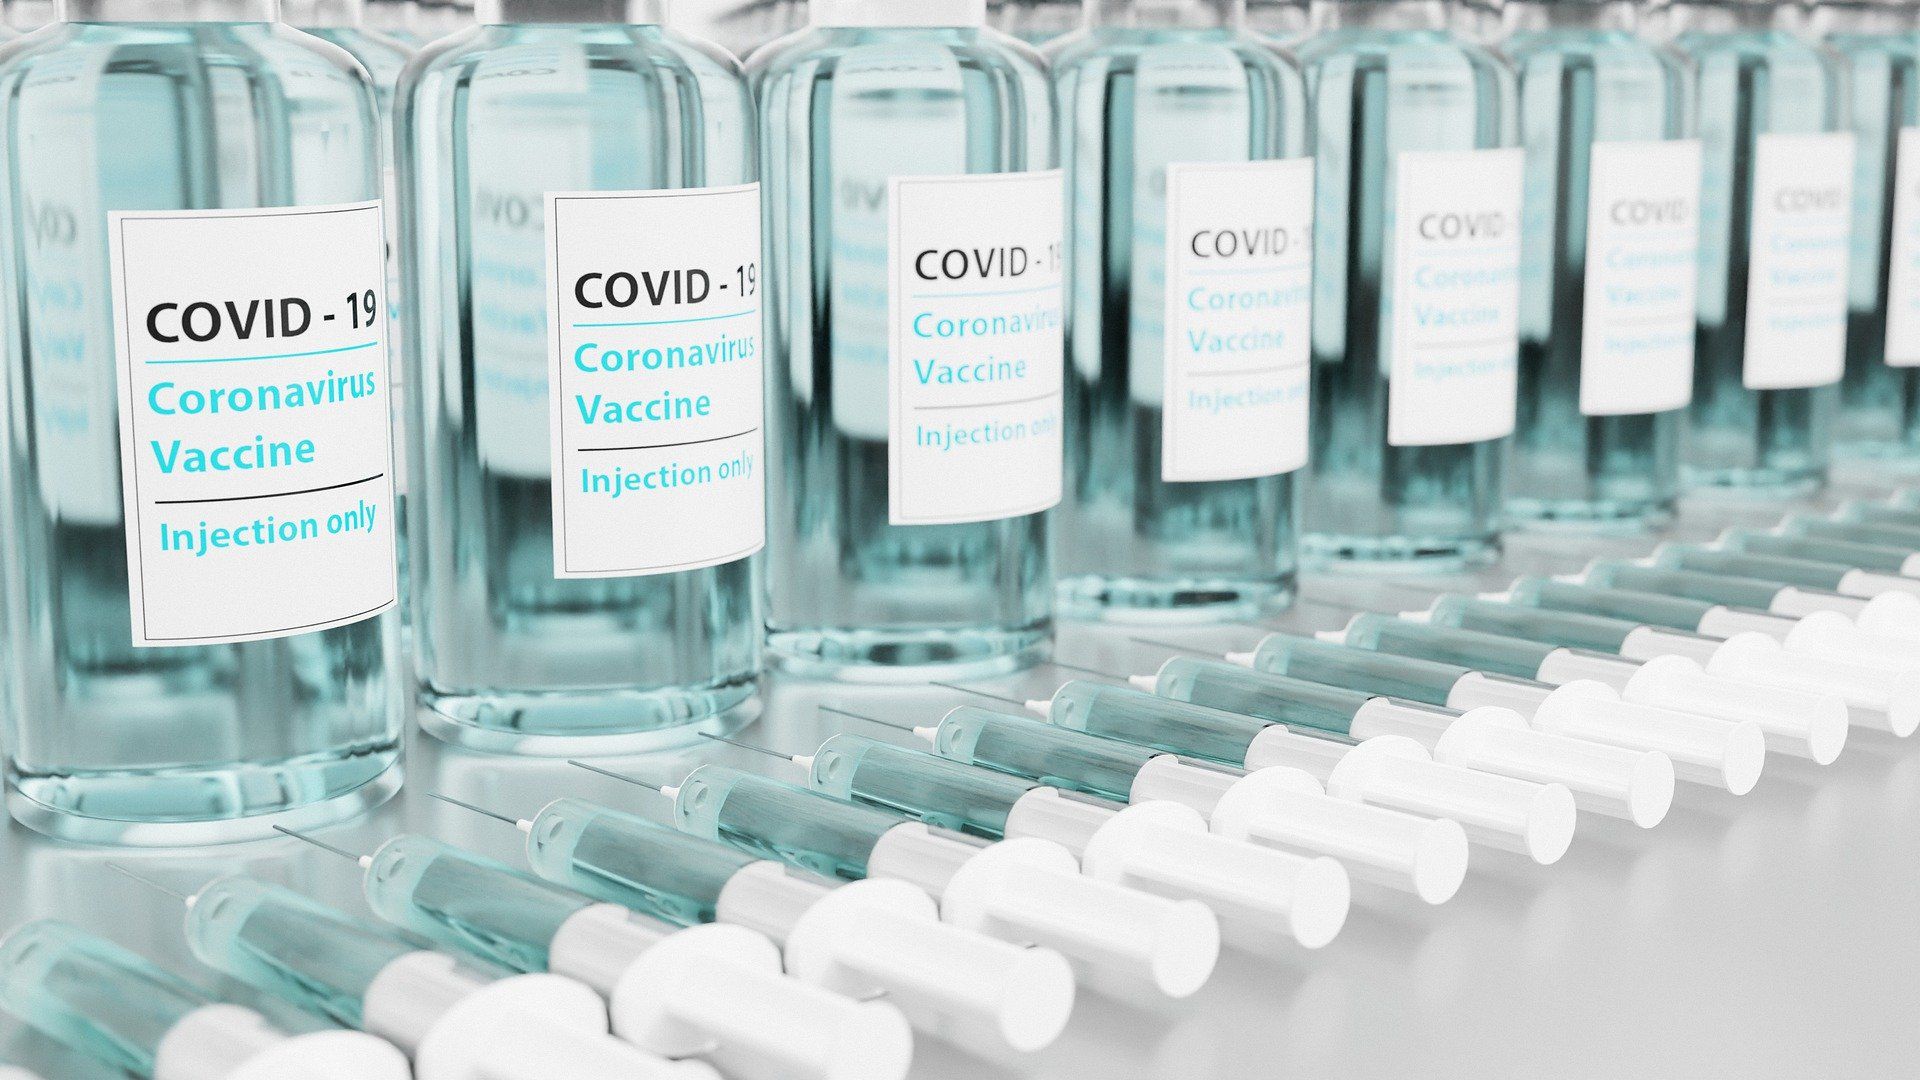 Cash for vaccine: US states to give cash prizes for getting COVID shots